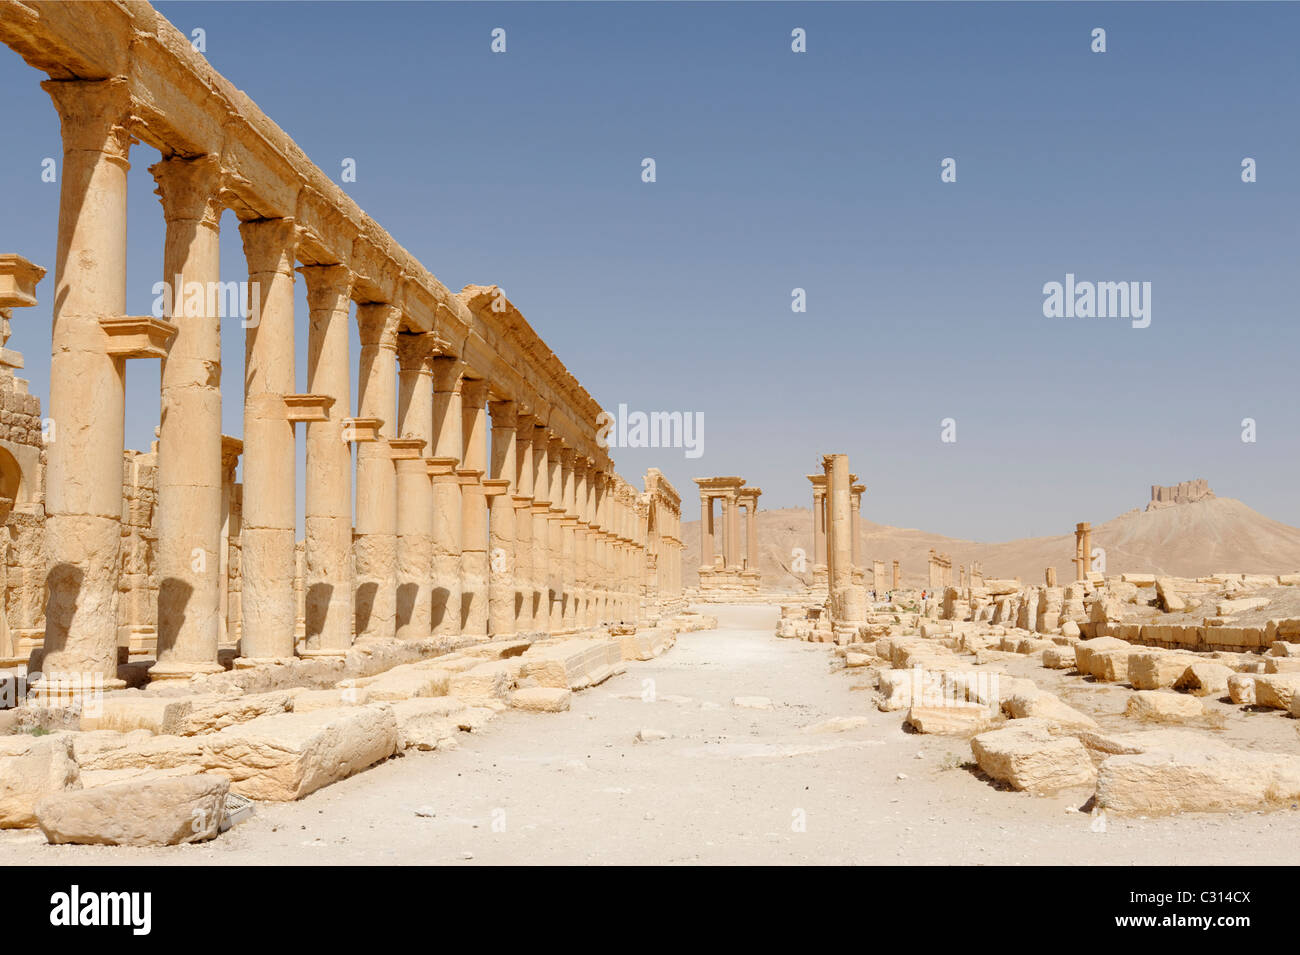 Central section of the Great Colonnade Street that covers the area from the Monumental arch to the Tetrapylon at Palmyra Syria. Stock Photo